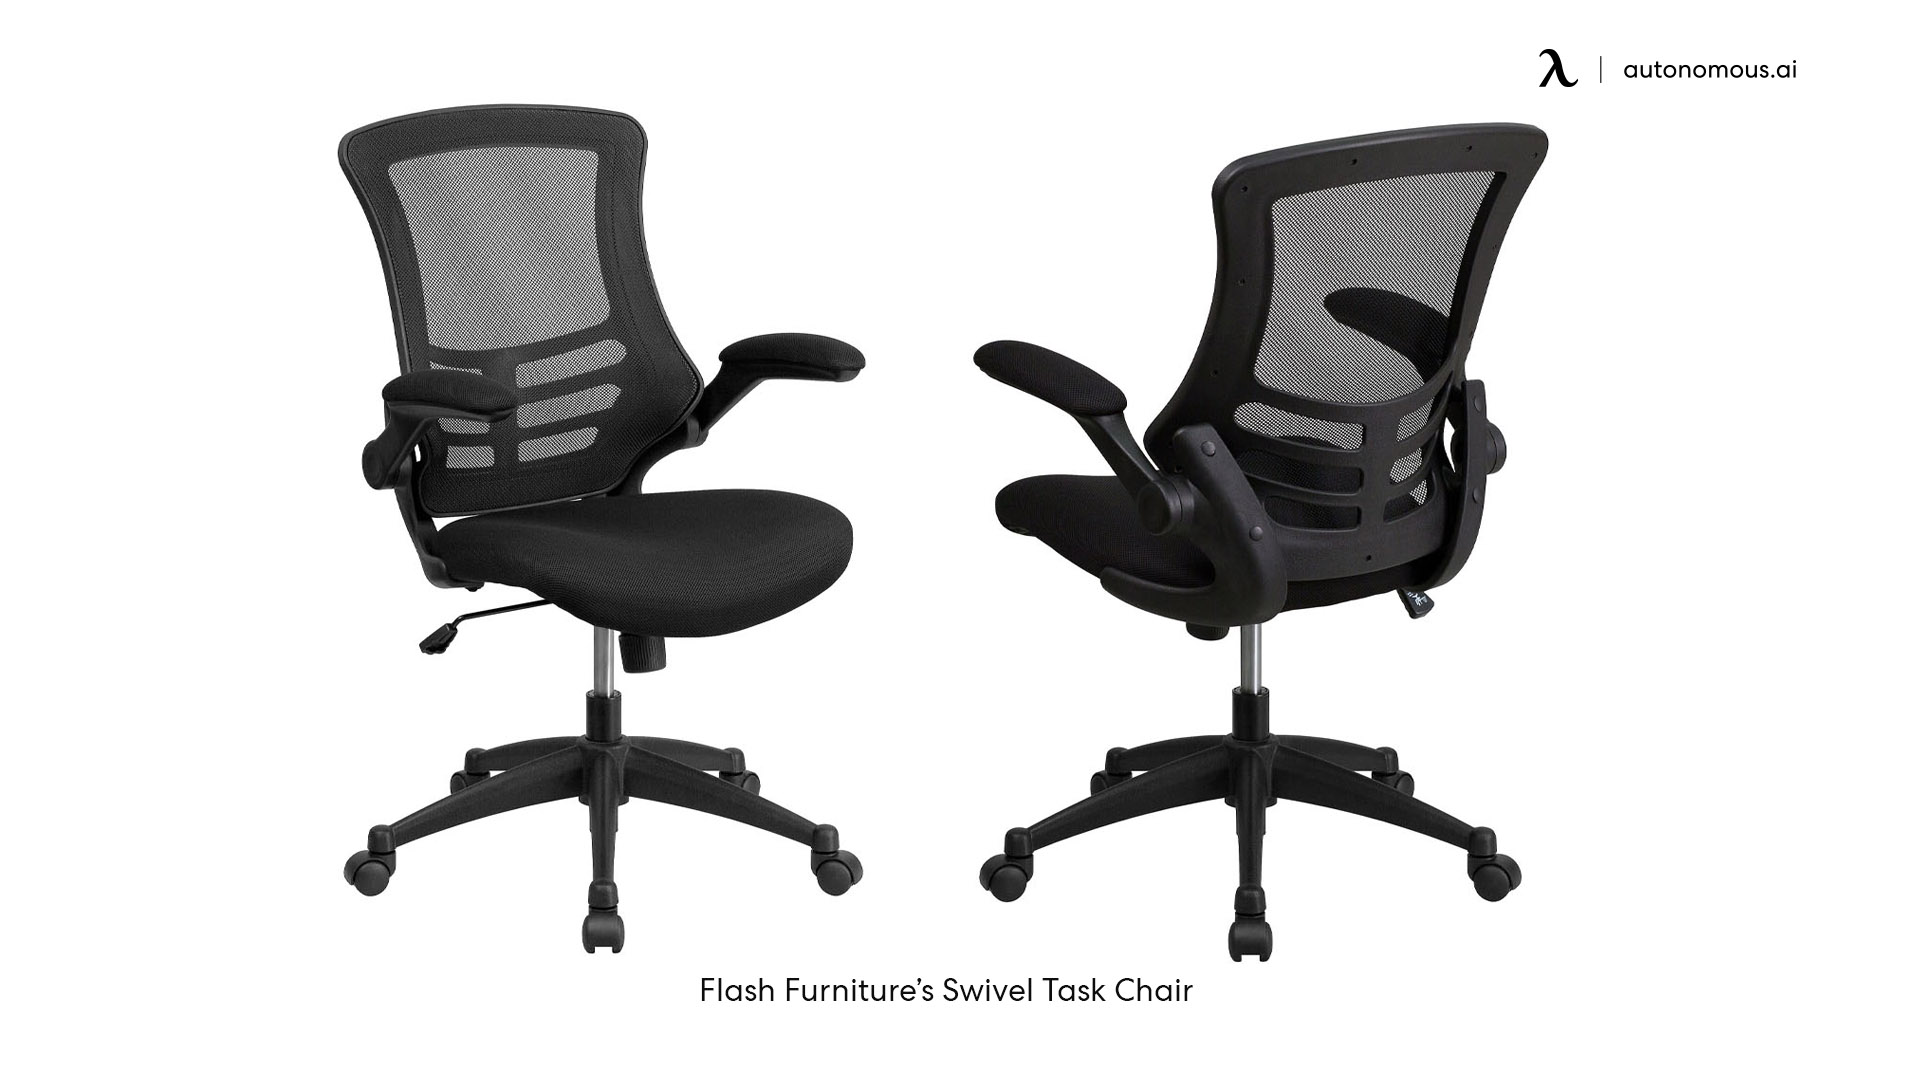 Mid-back swivel chair from Flash Furniture